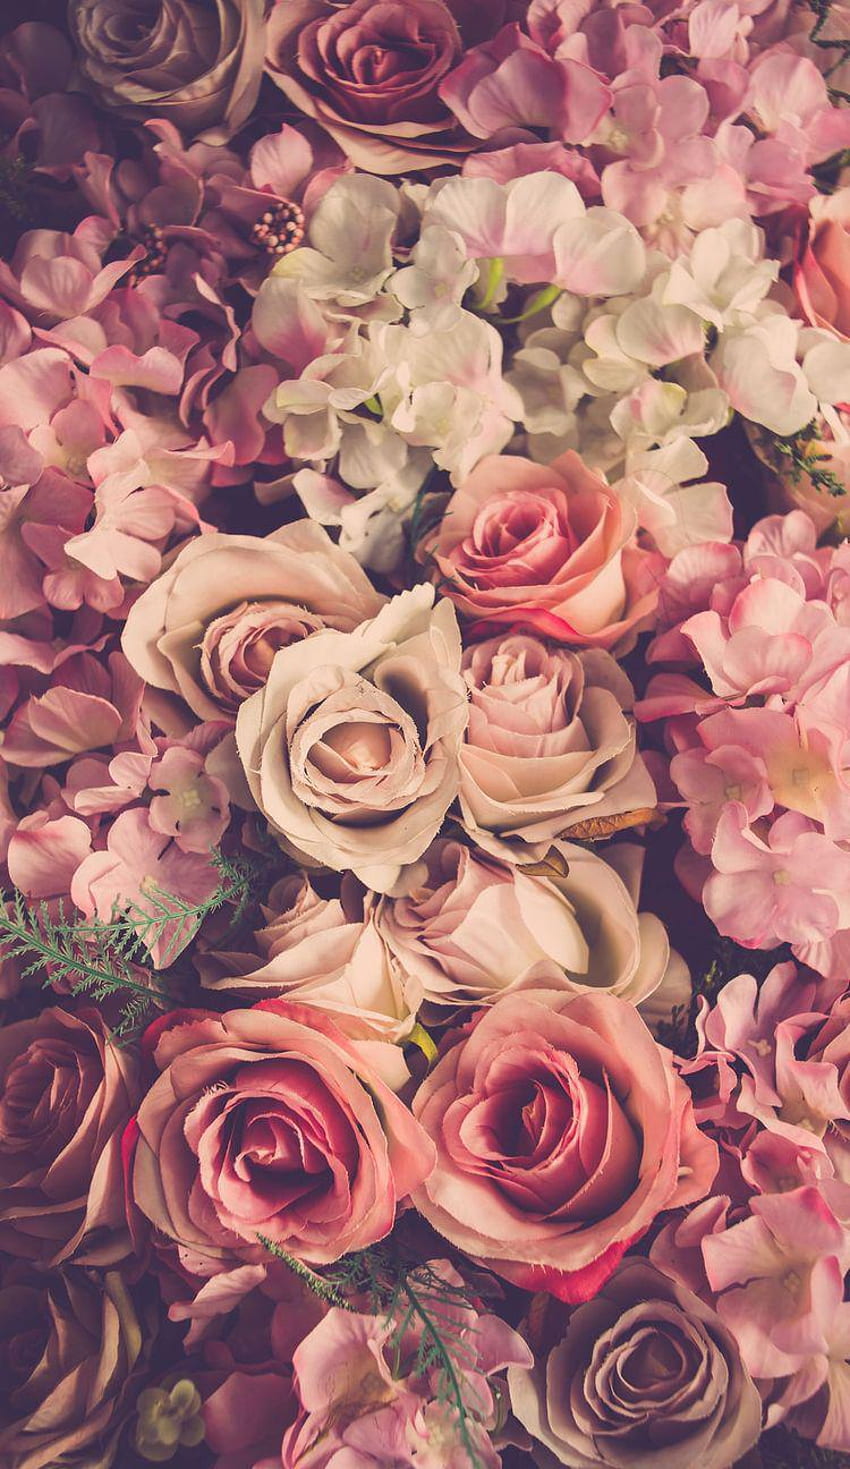 Shabby Chic Rustic iPhone, Rustic Floral iPhone X HD phone wallpaper